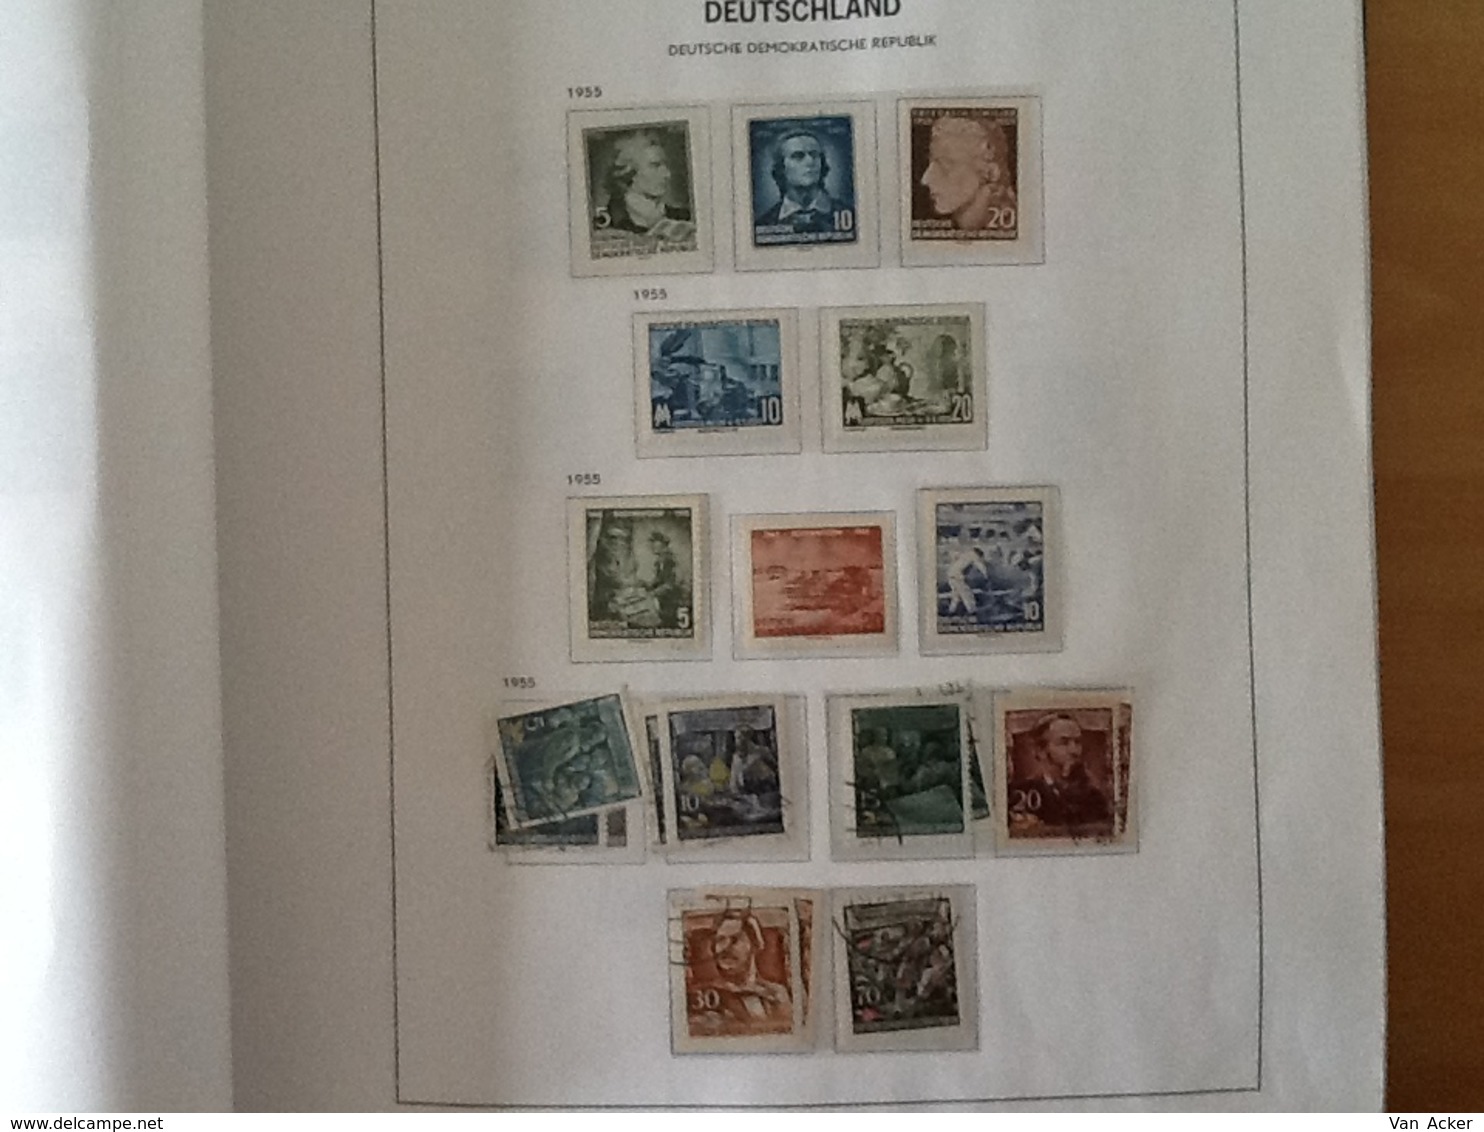 Collection East Germany 1949 till 1990 MNH/MH/used.